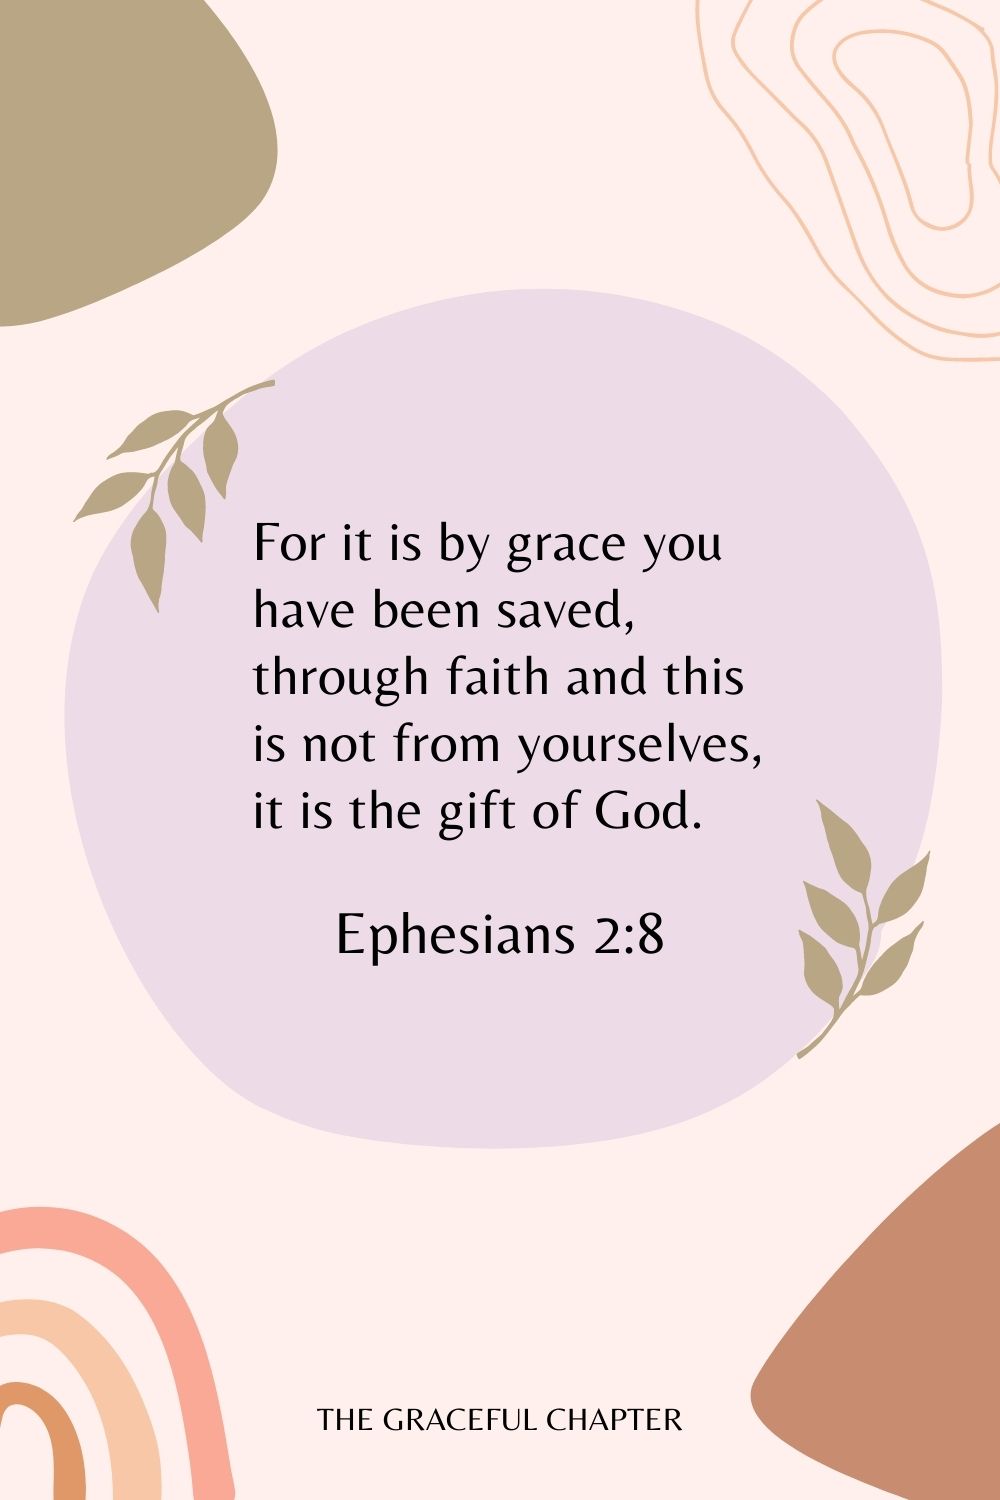 For it is by grace you have been saved, through faith and this is not from yourselves, it is the gift of God. Ephesians 2:8